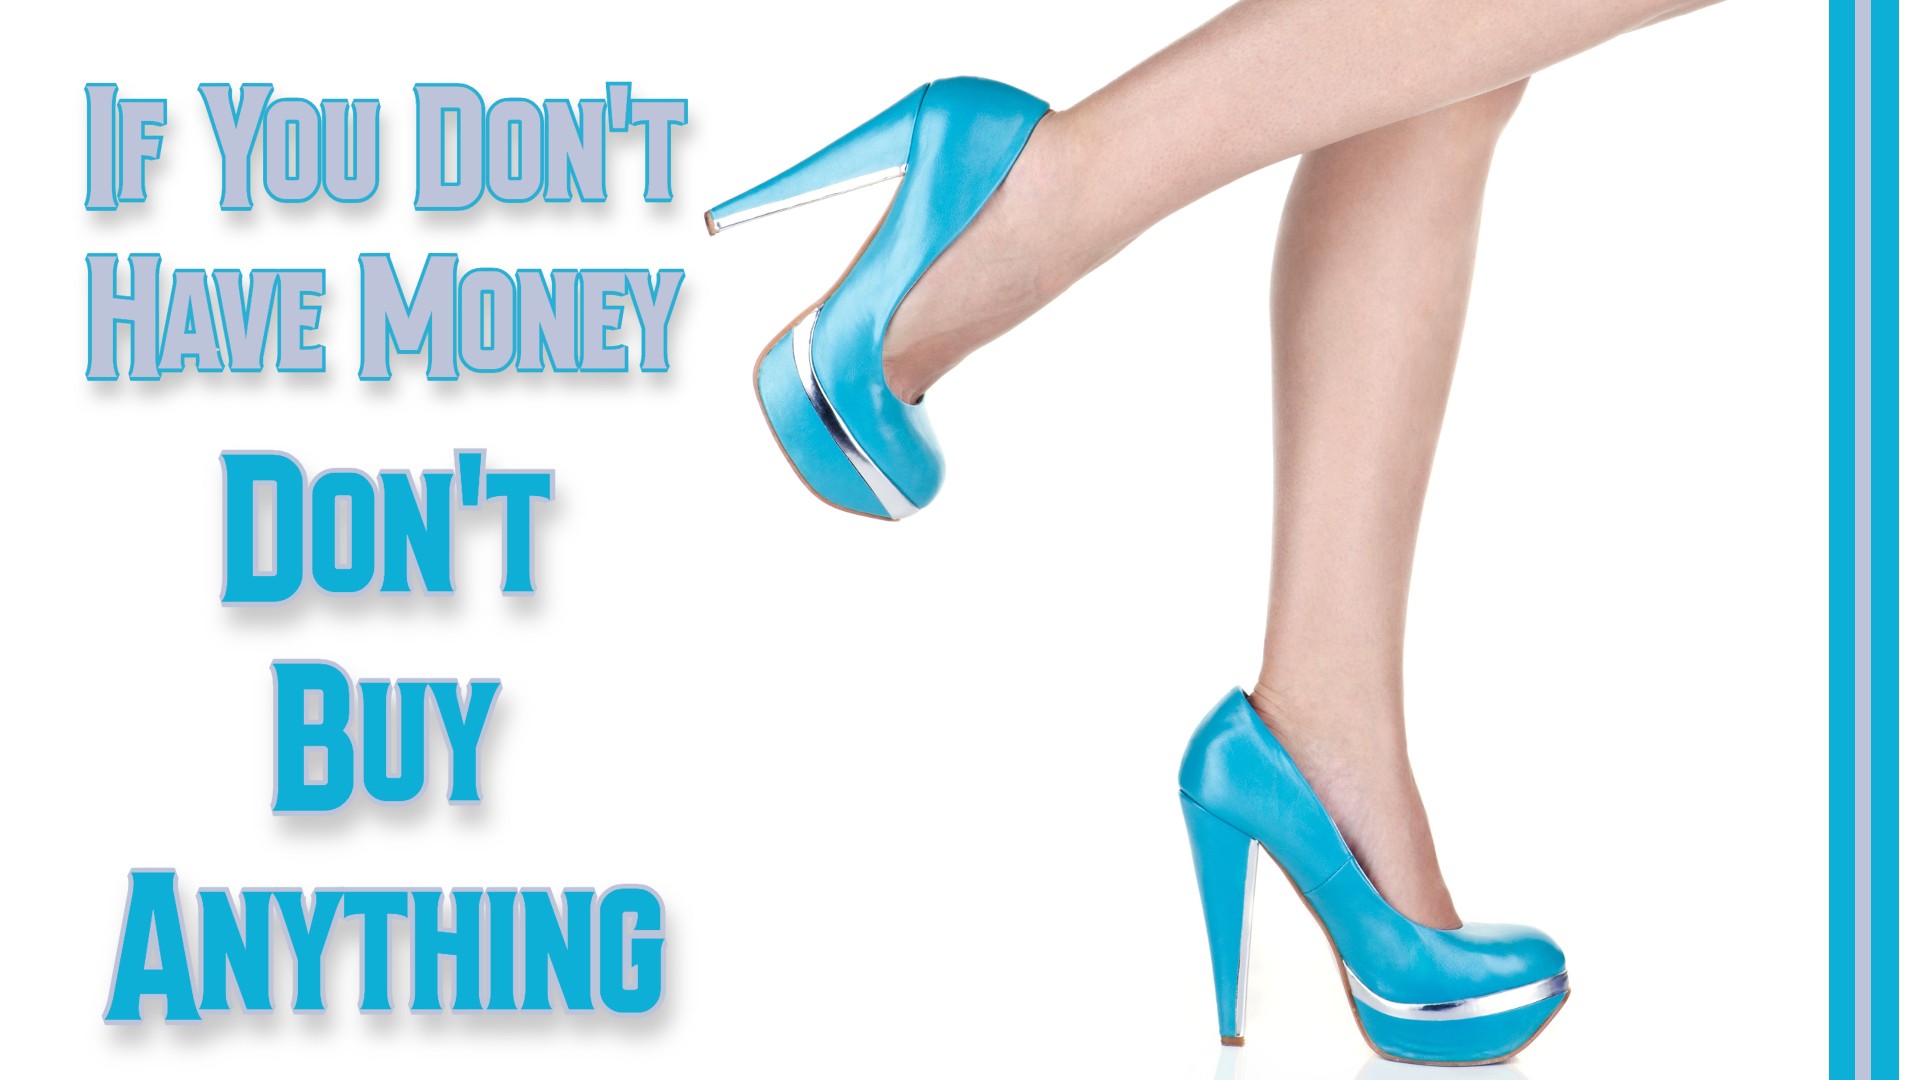 If You Don’t Have Money: Don’t Buy Anything